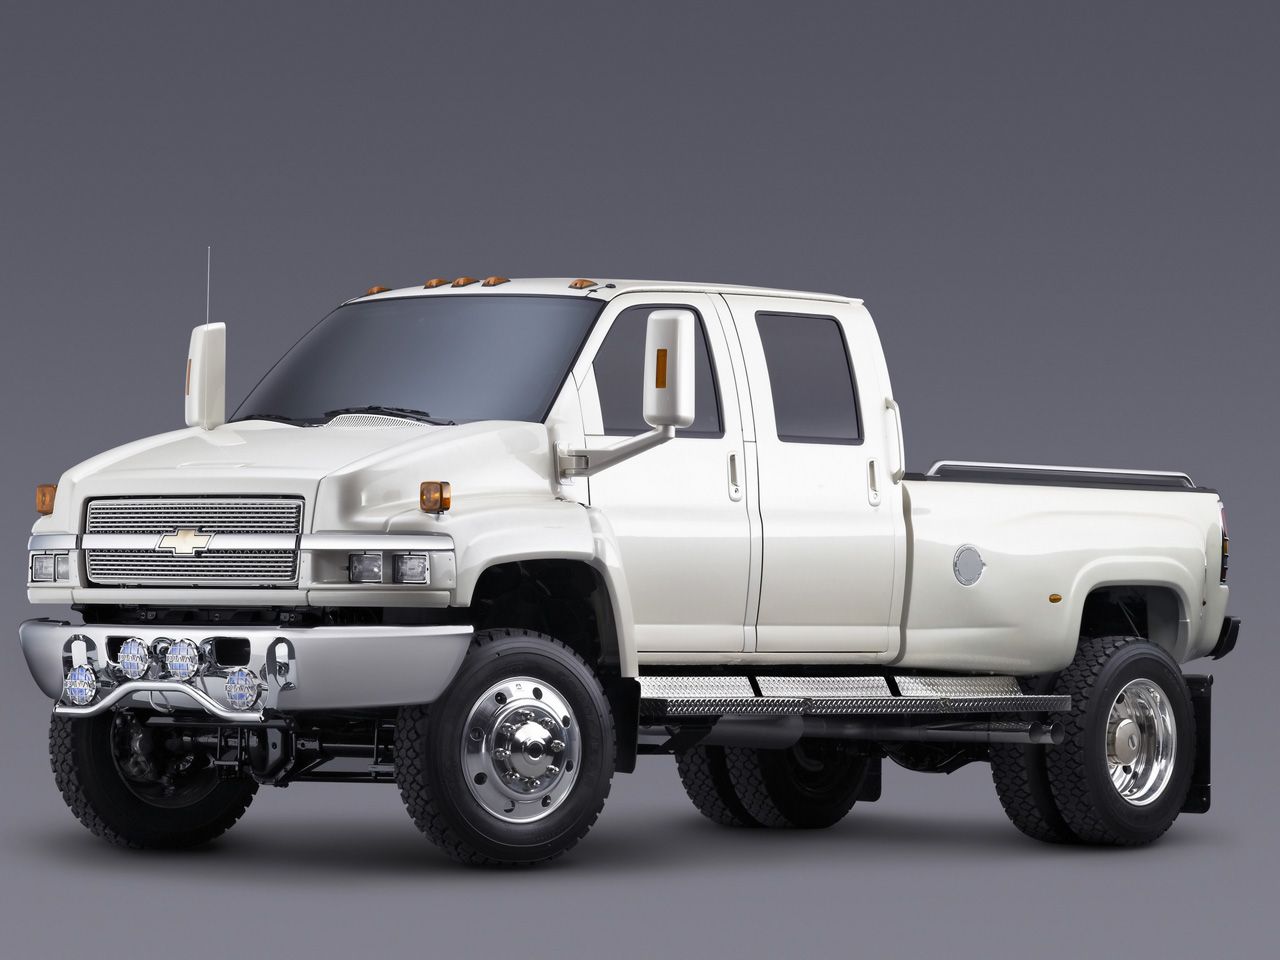 Chevy c5500 owners manual